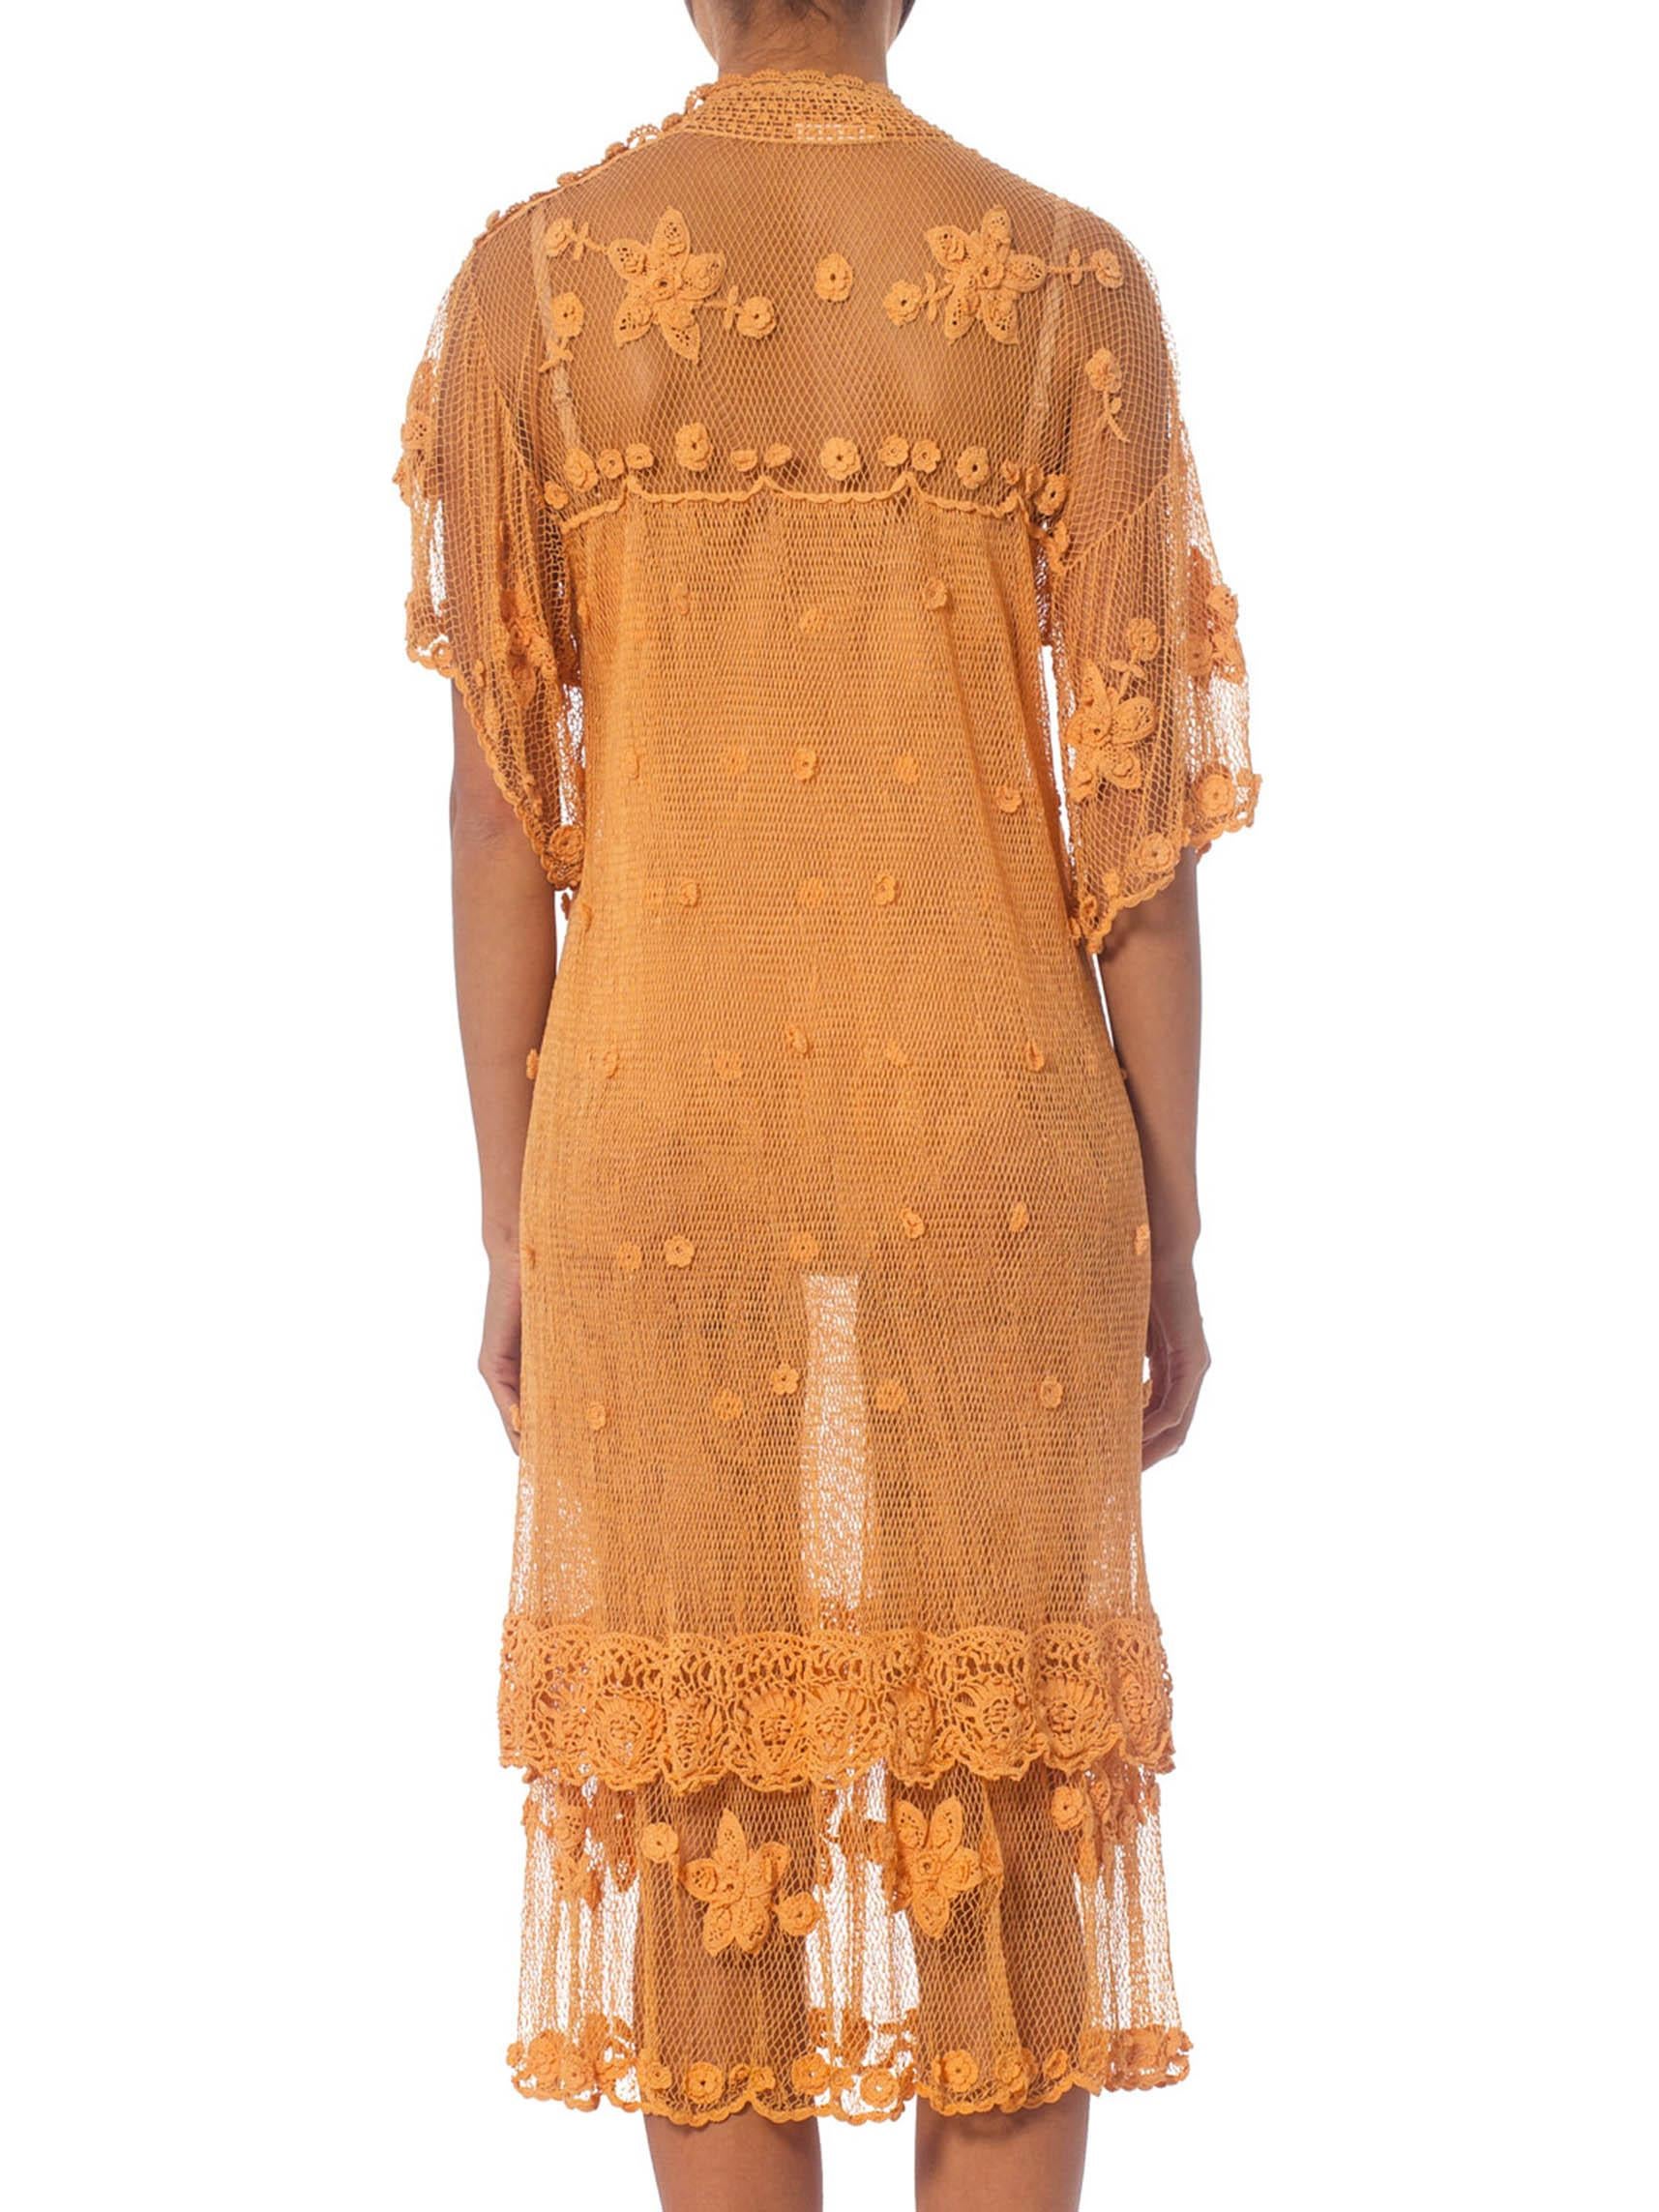 1980S Hand Crocheted Net Lace Boho Dress In Excellent Condition For Sale In New York, NY